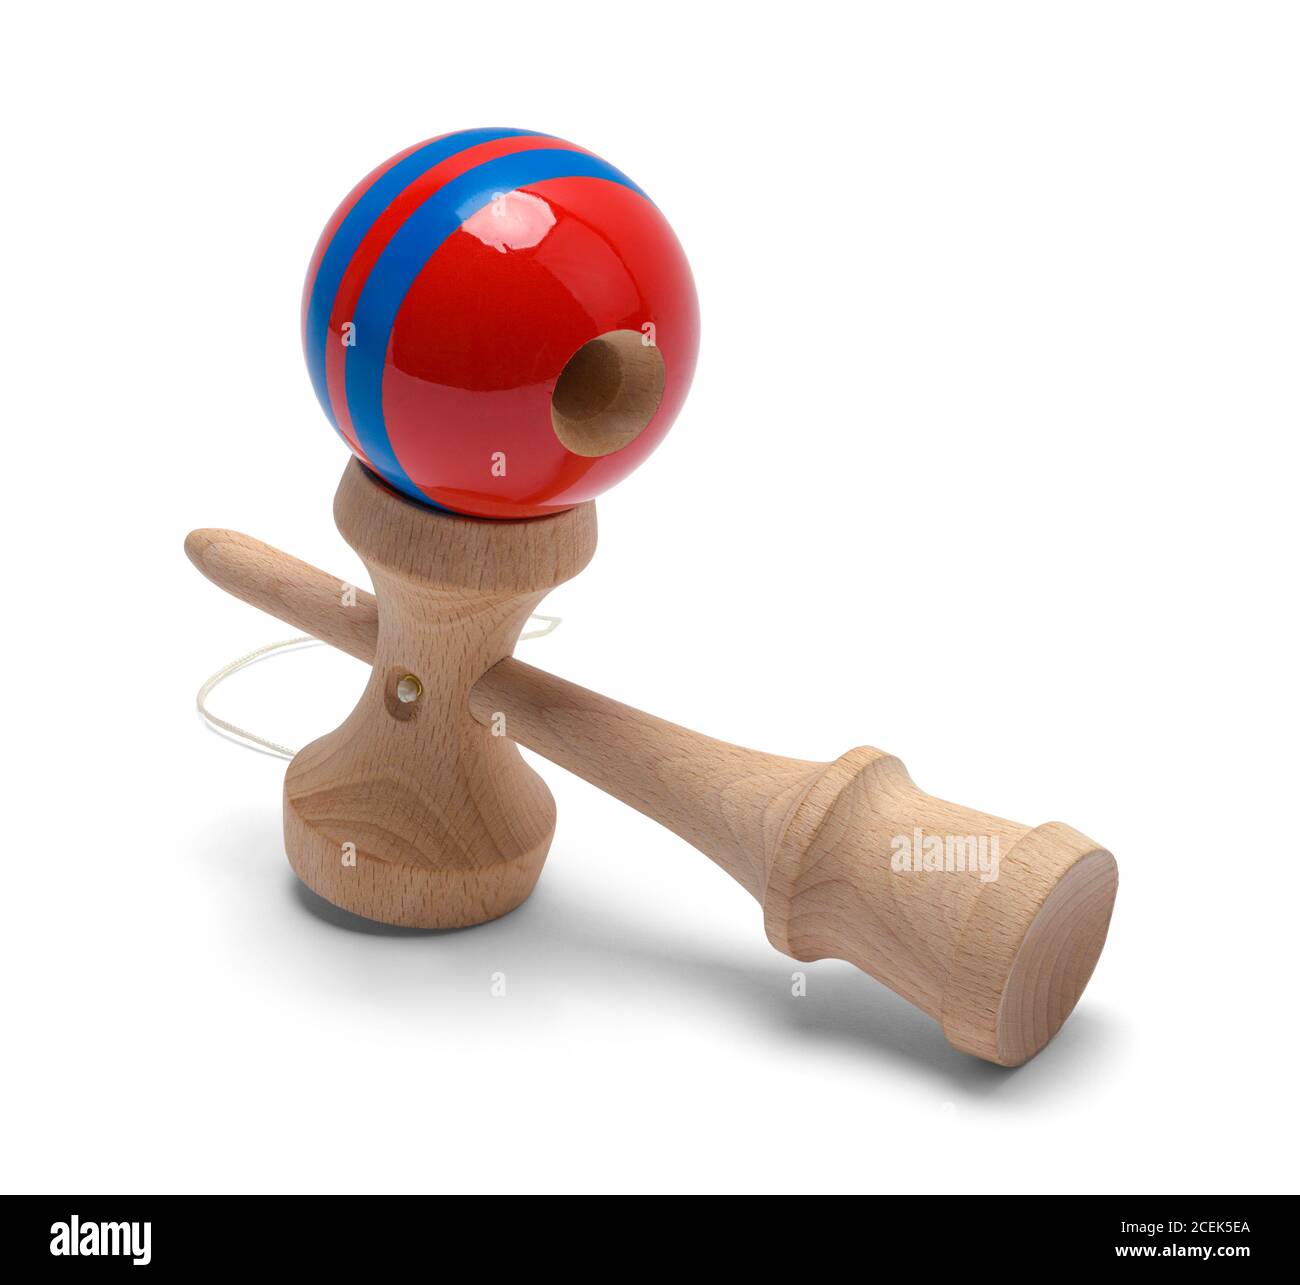 Toy Kendama Game with Cup and Ball Isolated on White. Stock Photo